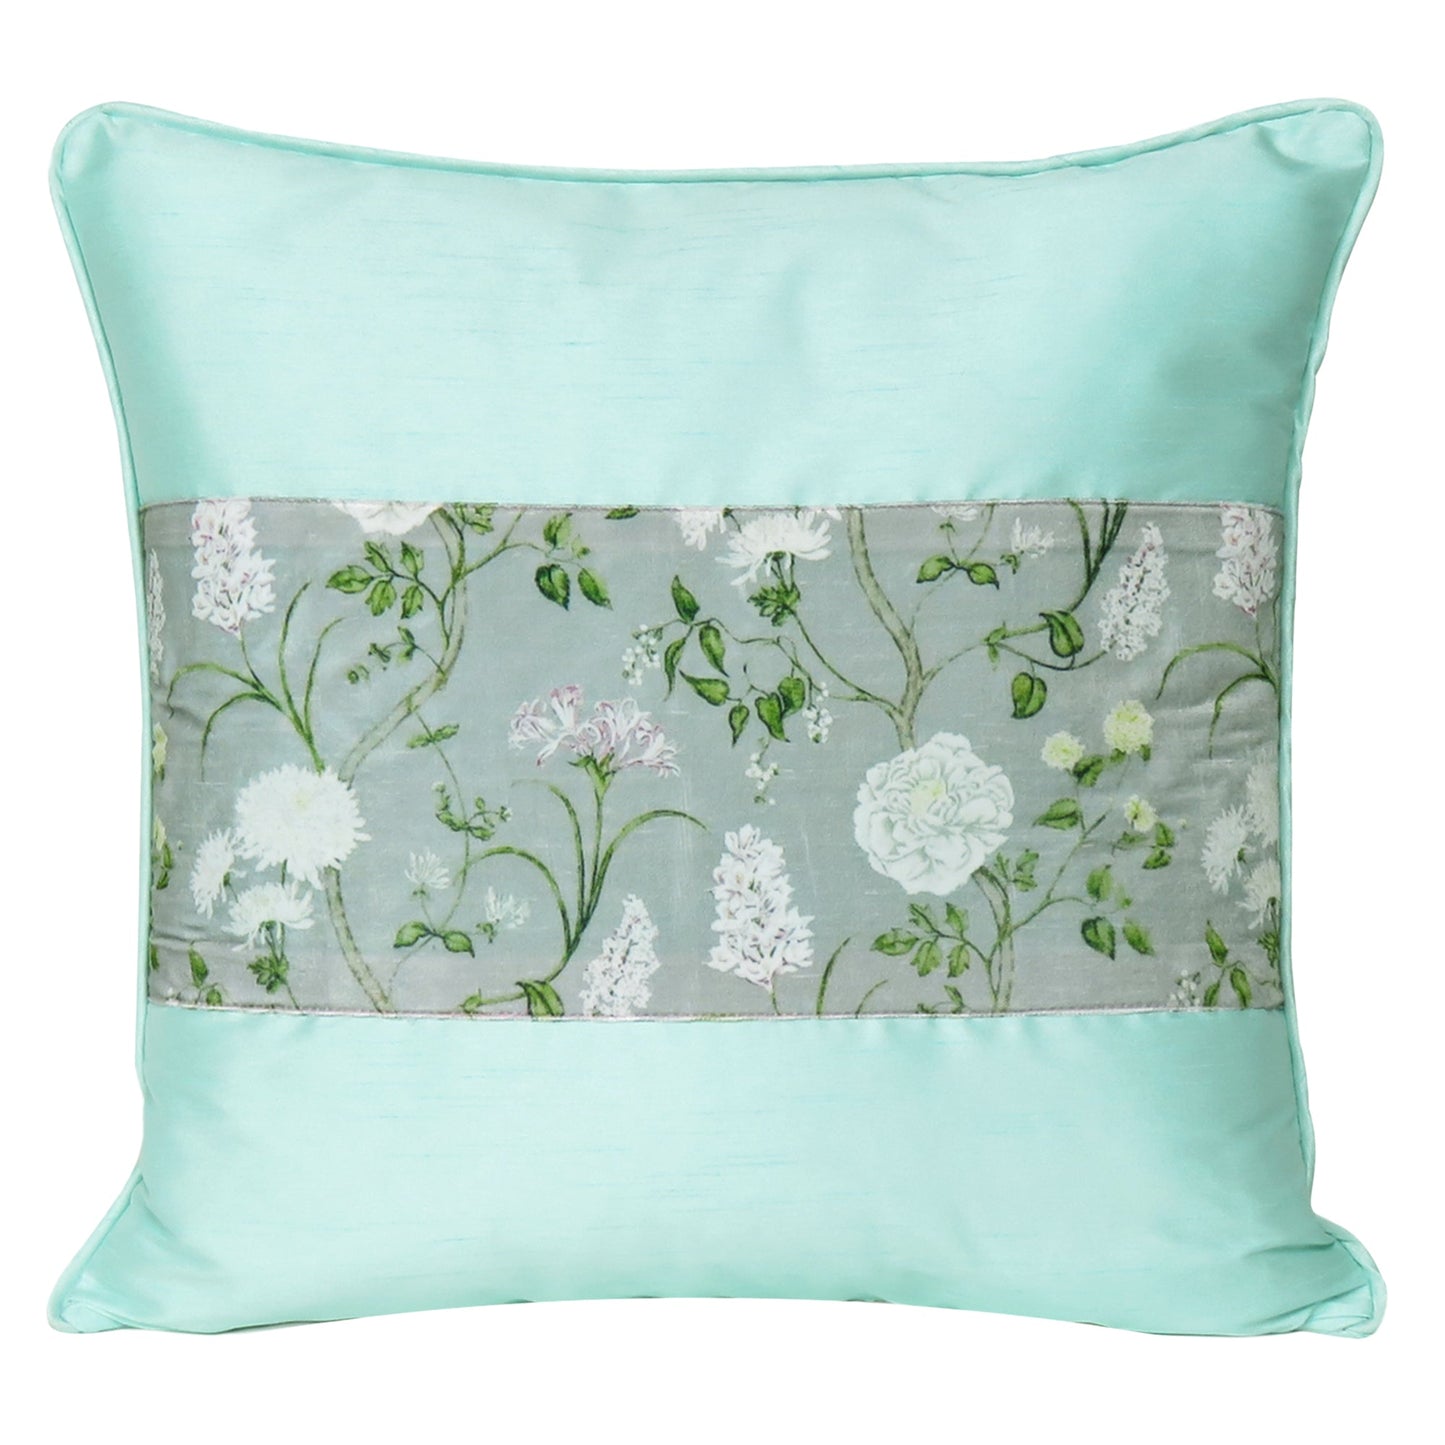 Velvet Polydupion Decorative Printed Cushion Cases in Set of 2 - Sea Green